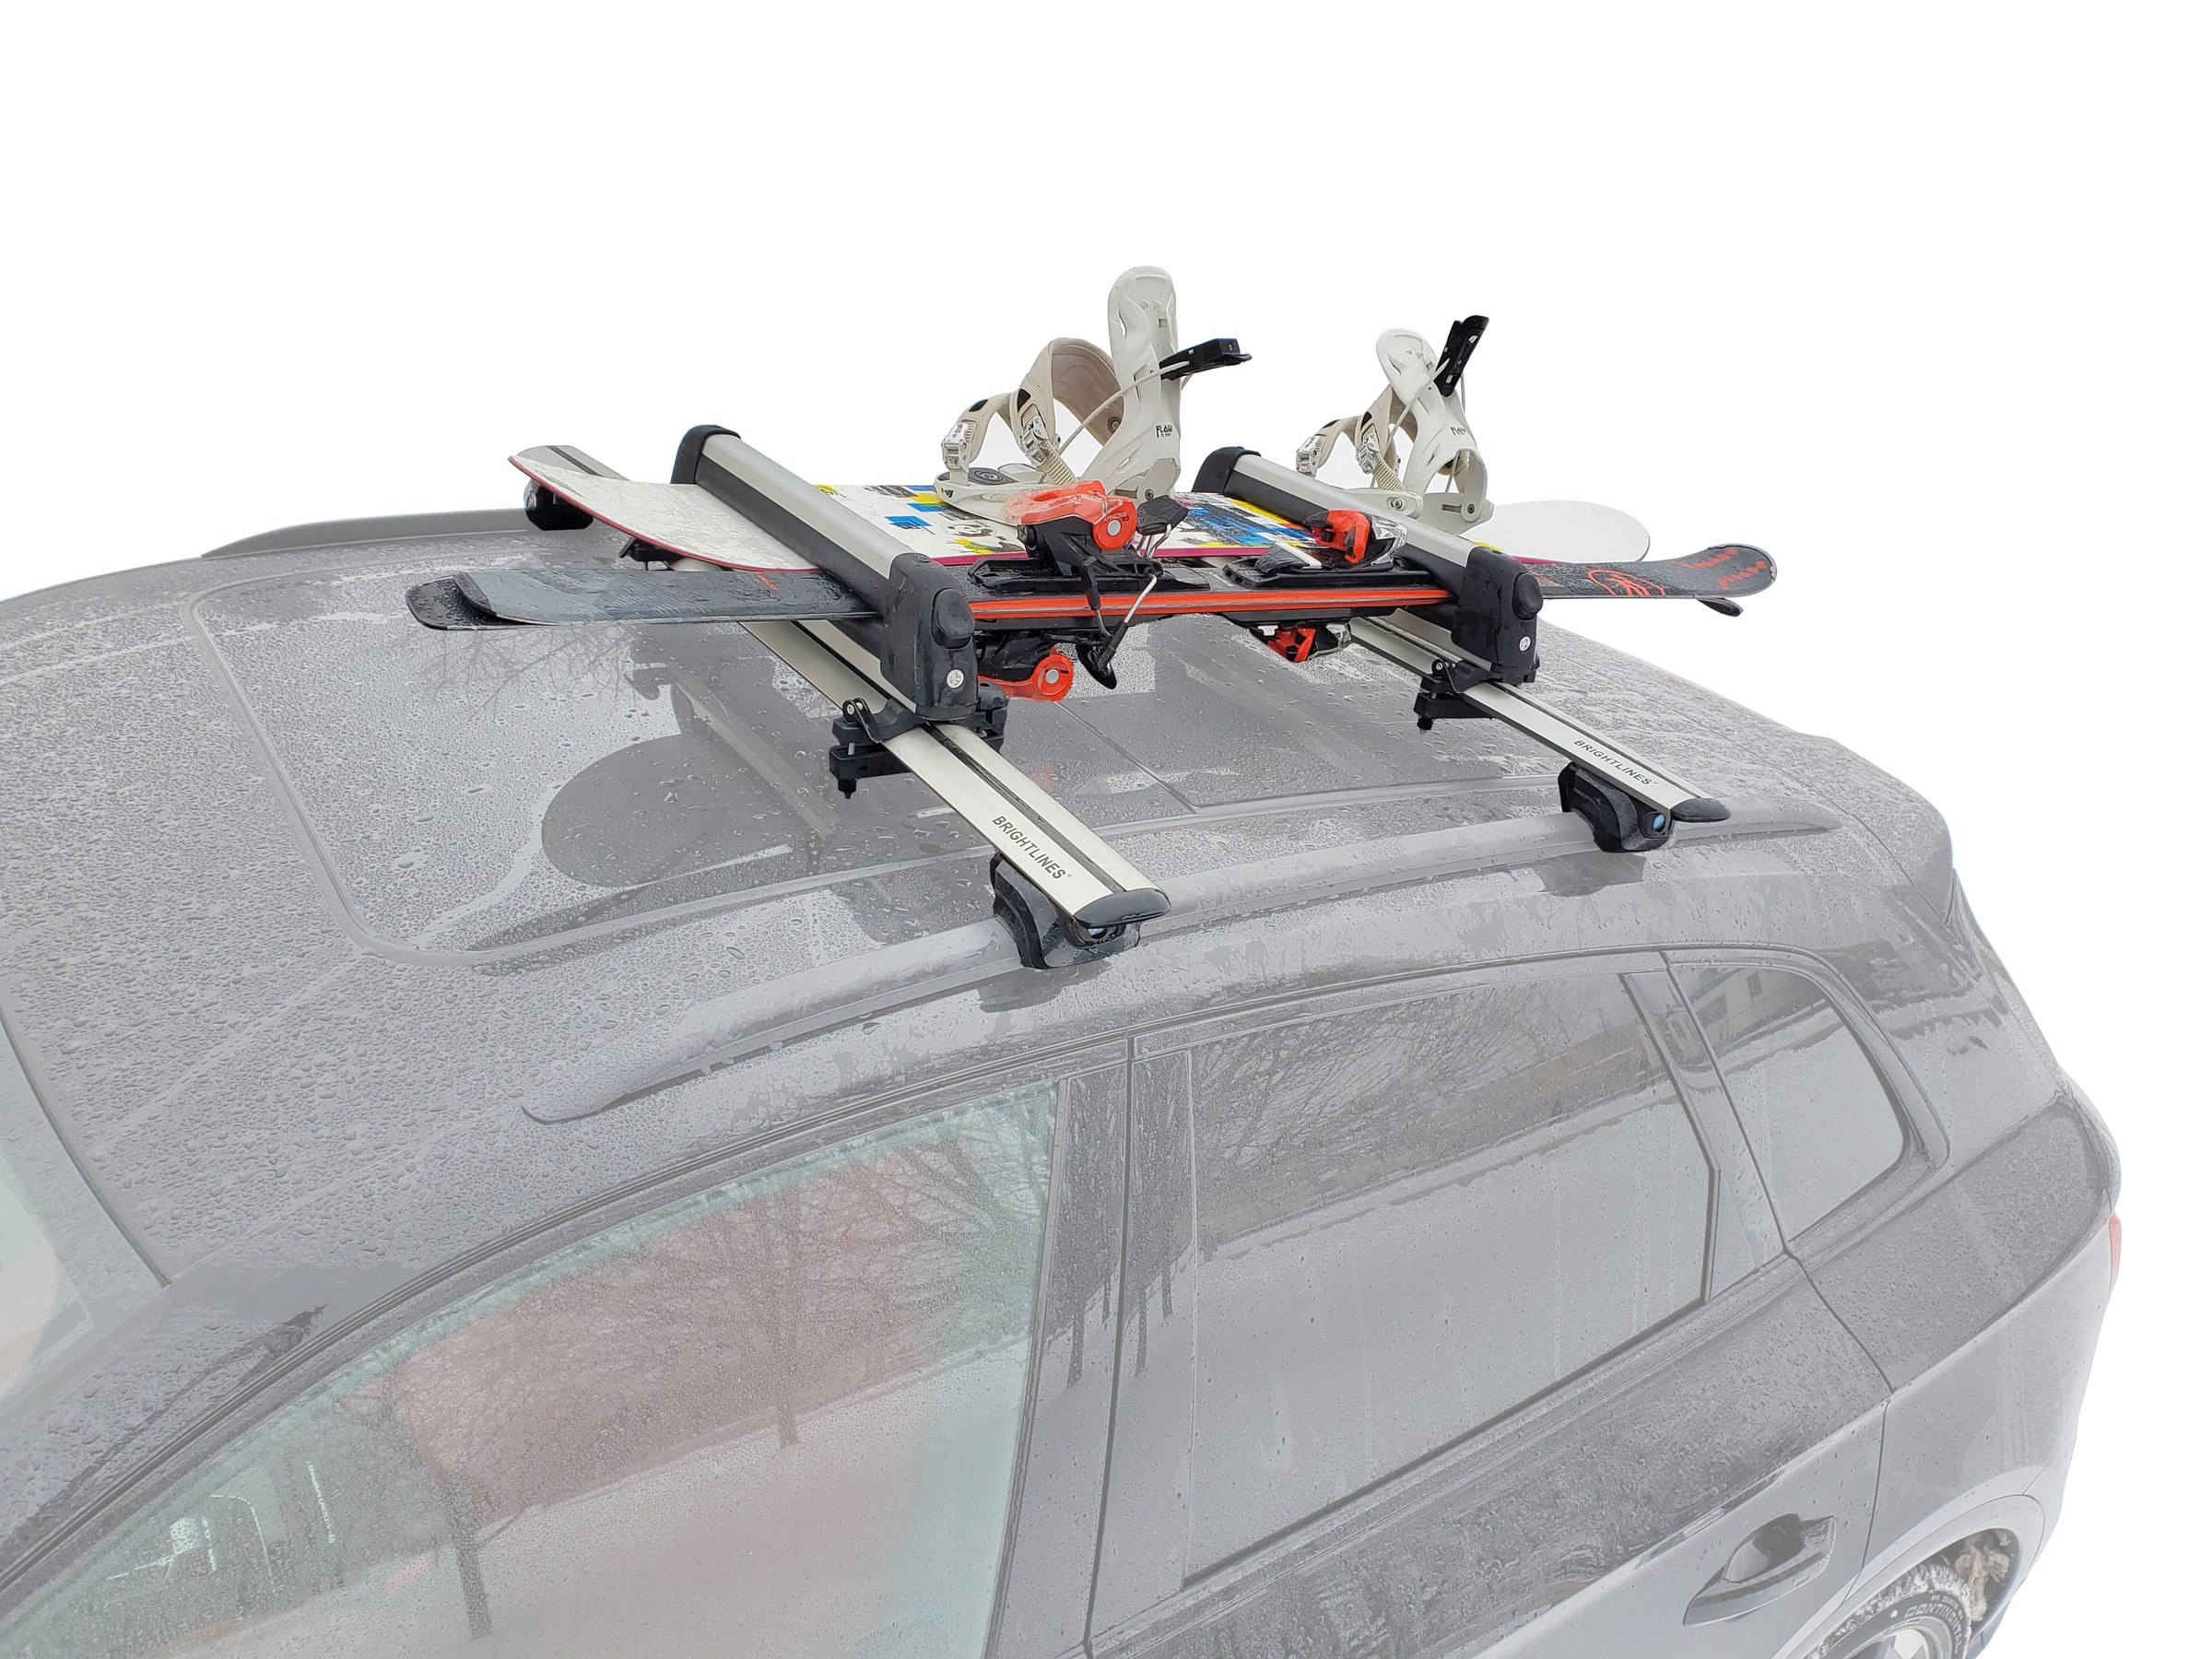 BRIGHTLINES Universal Ski Snowboard Racks Carriers 2pcs Mount on Vehicle Top Cross Bars (Up to 4 Skis or 2 Snowboards) - image 5 of 9